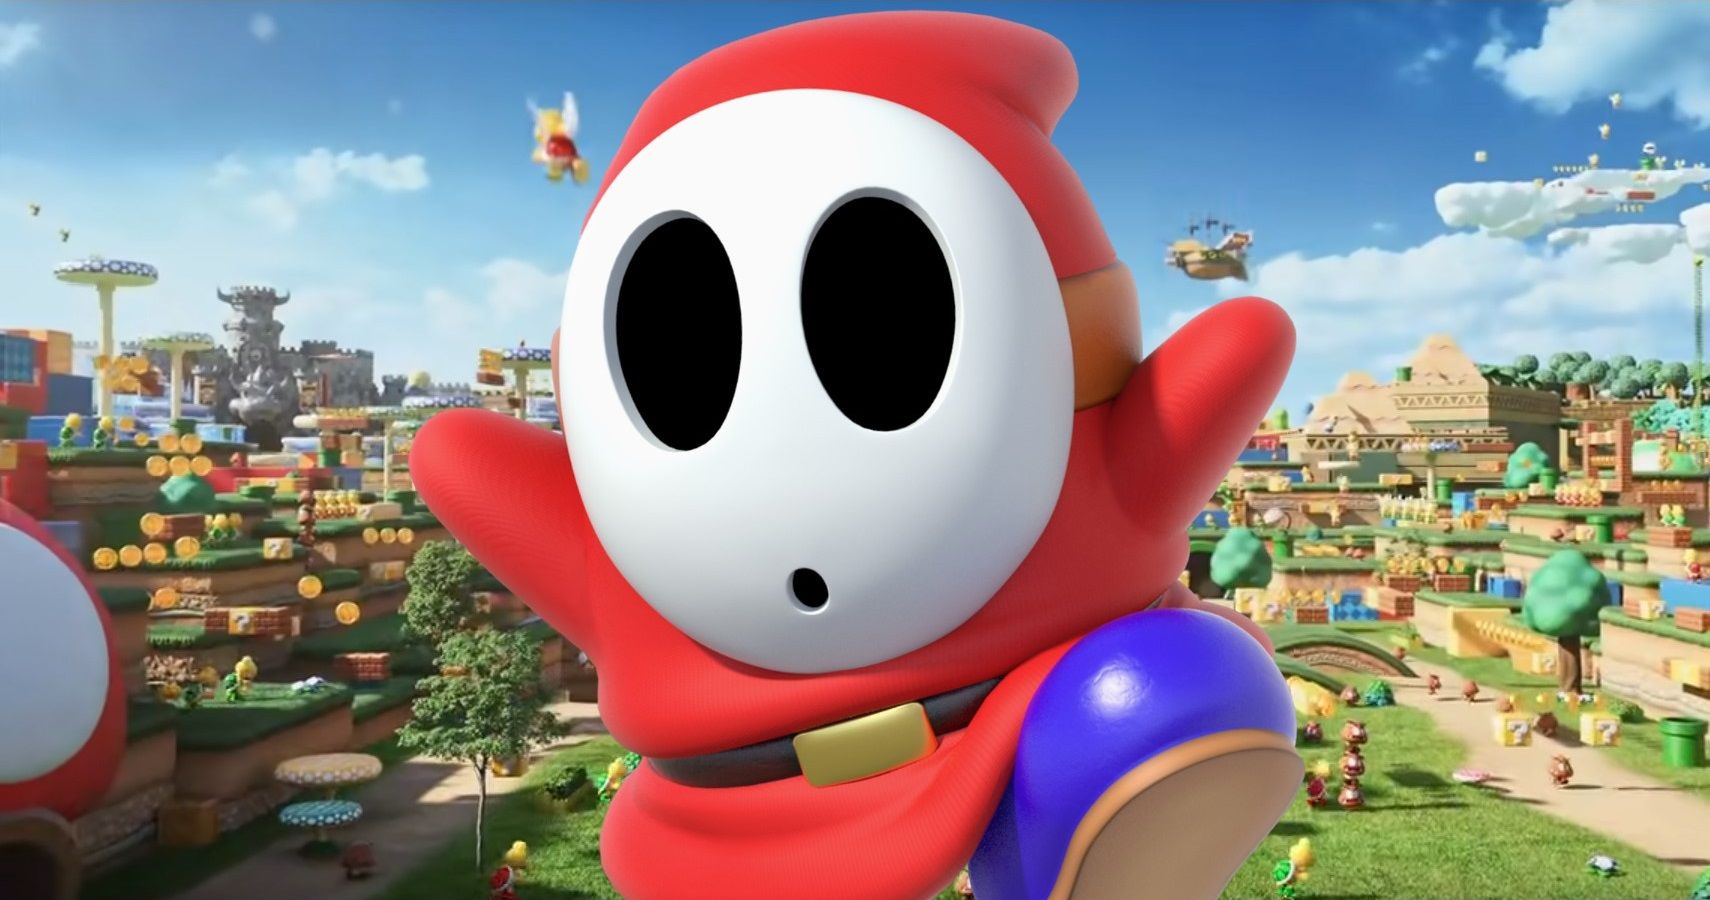 Shy Guy Has Been Spotted At Super Nintendo World